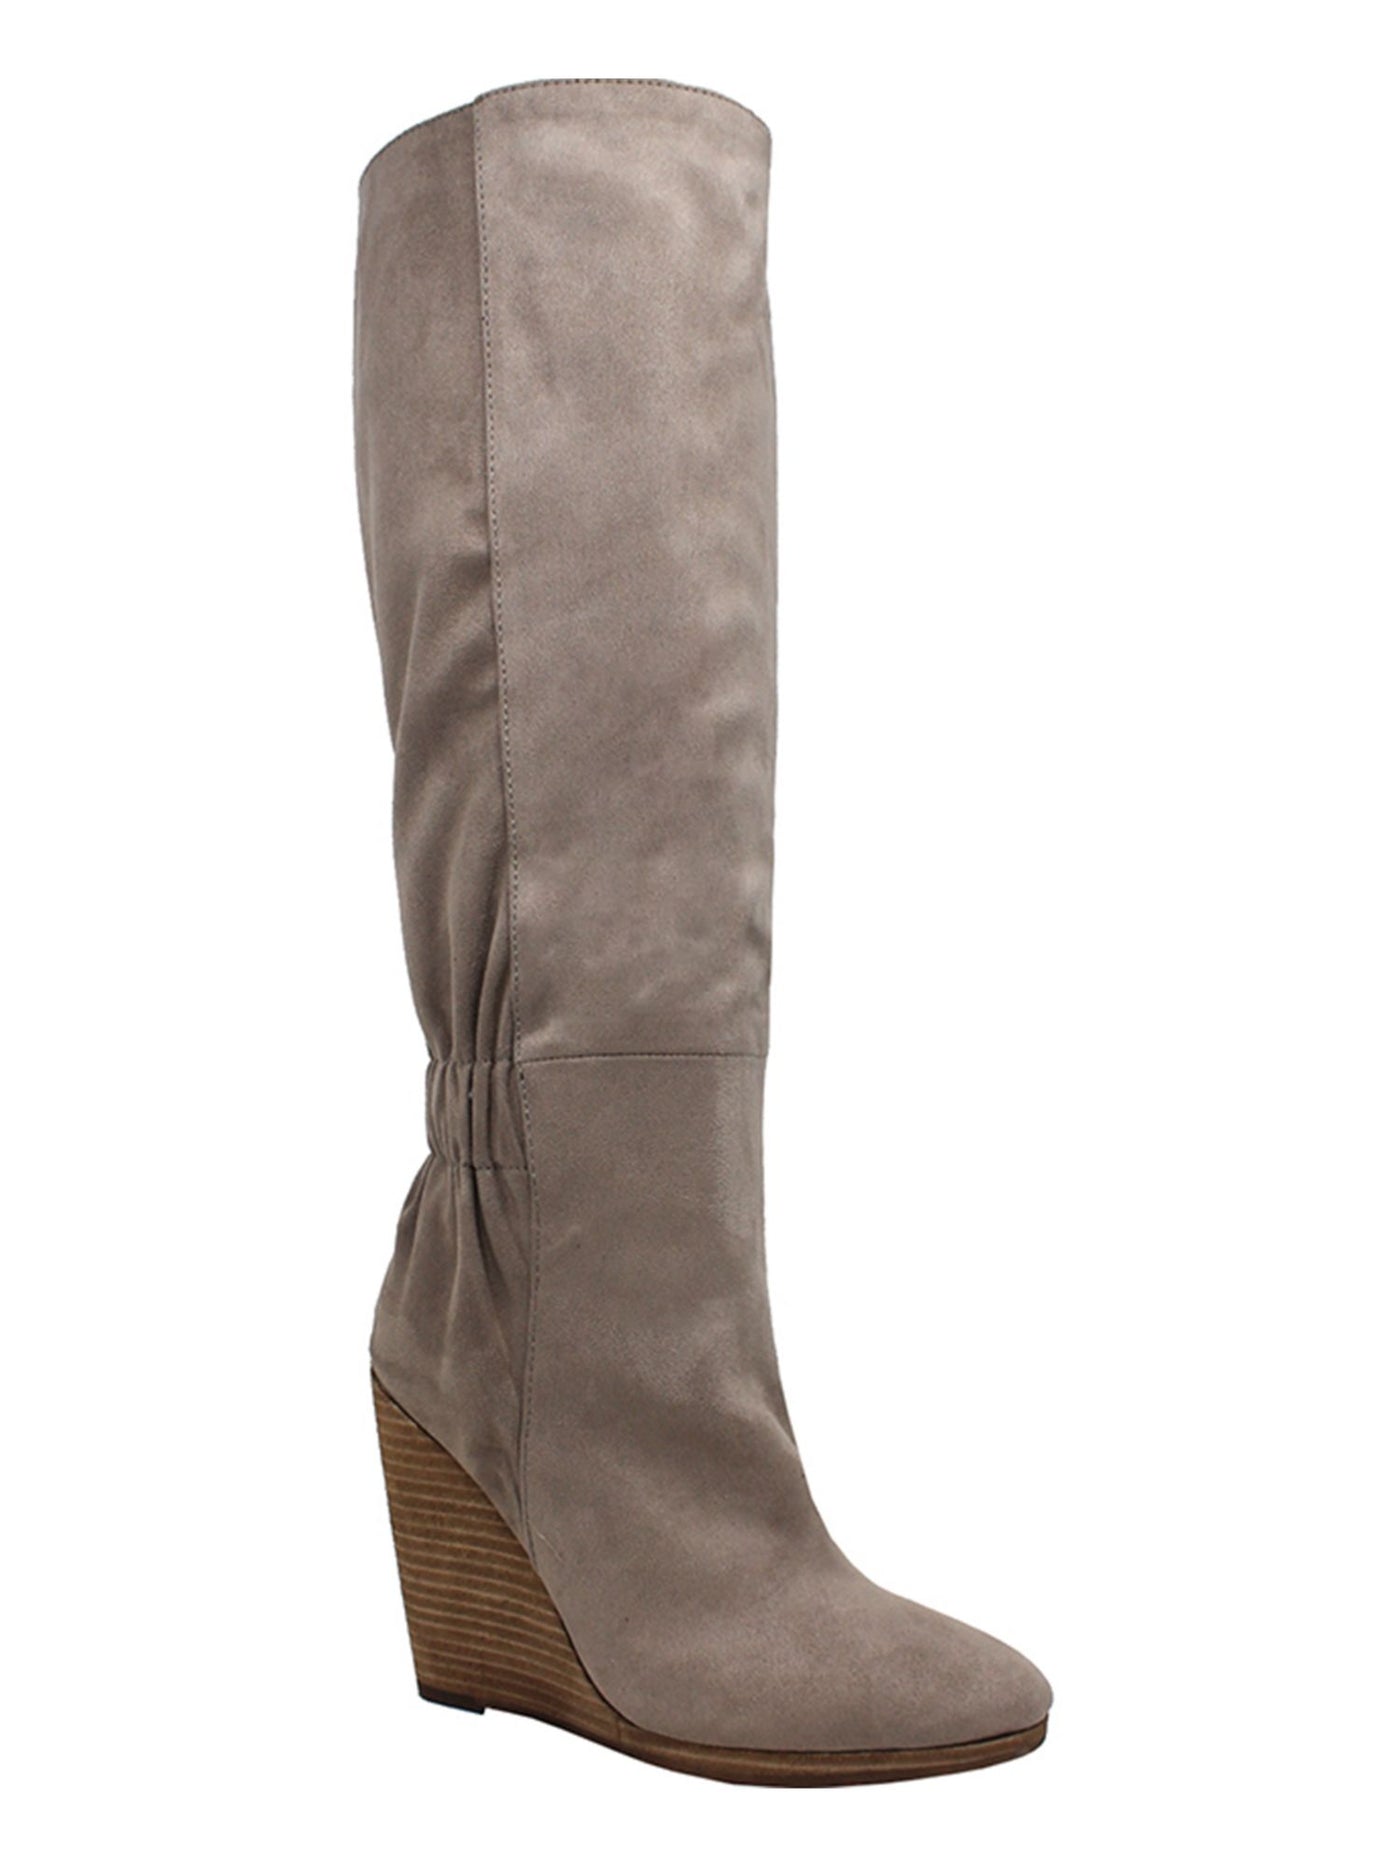 CHARLES BY CHARLES DAVID Womens Beige Padded Ribbed Hampton Round Toe Wedge Dress Boots Shoes 6.5 M